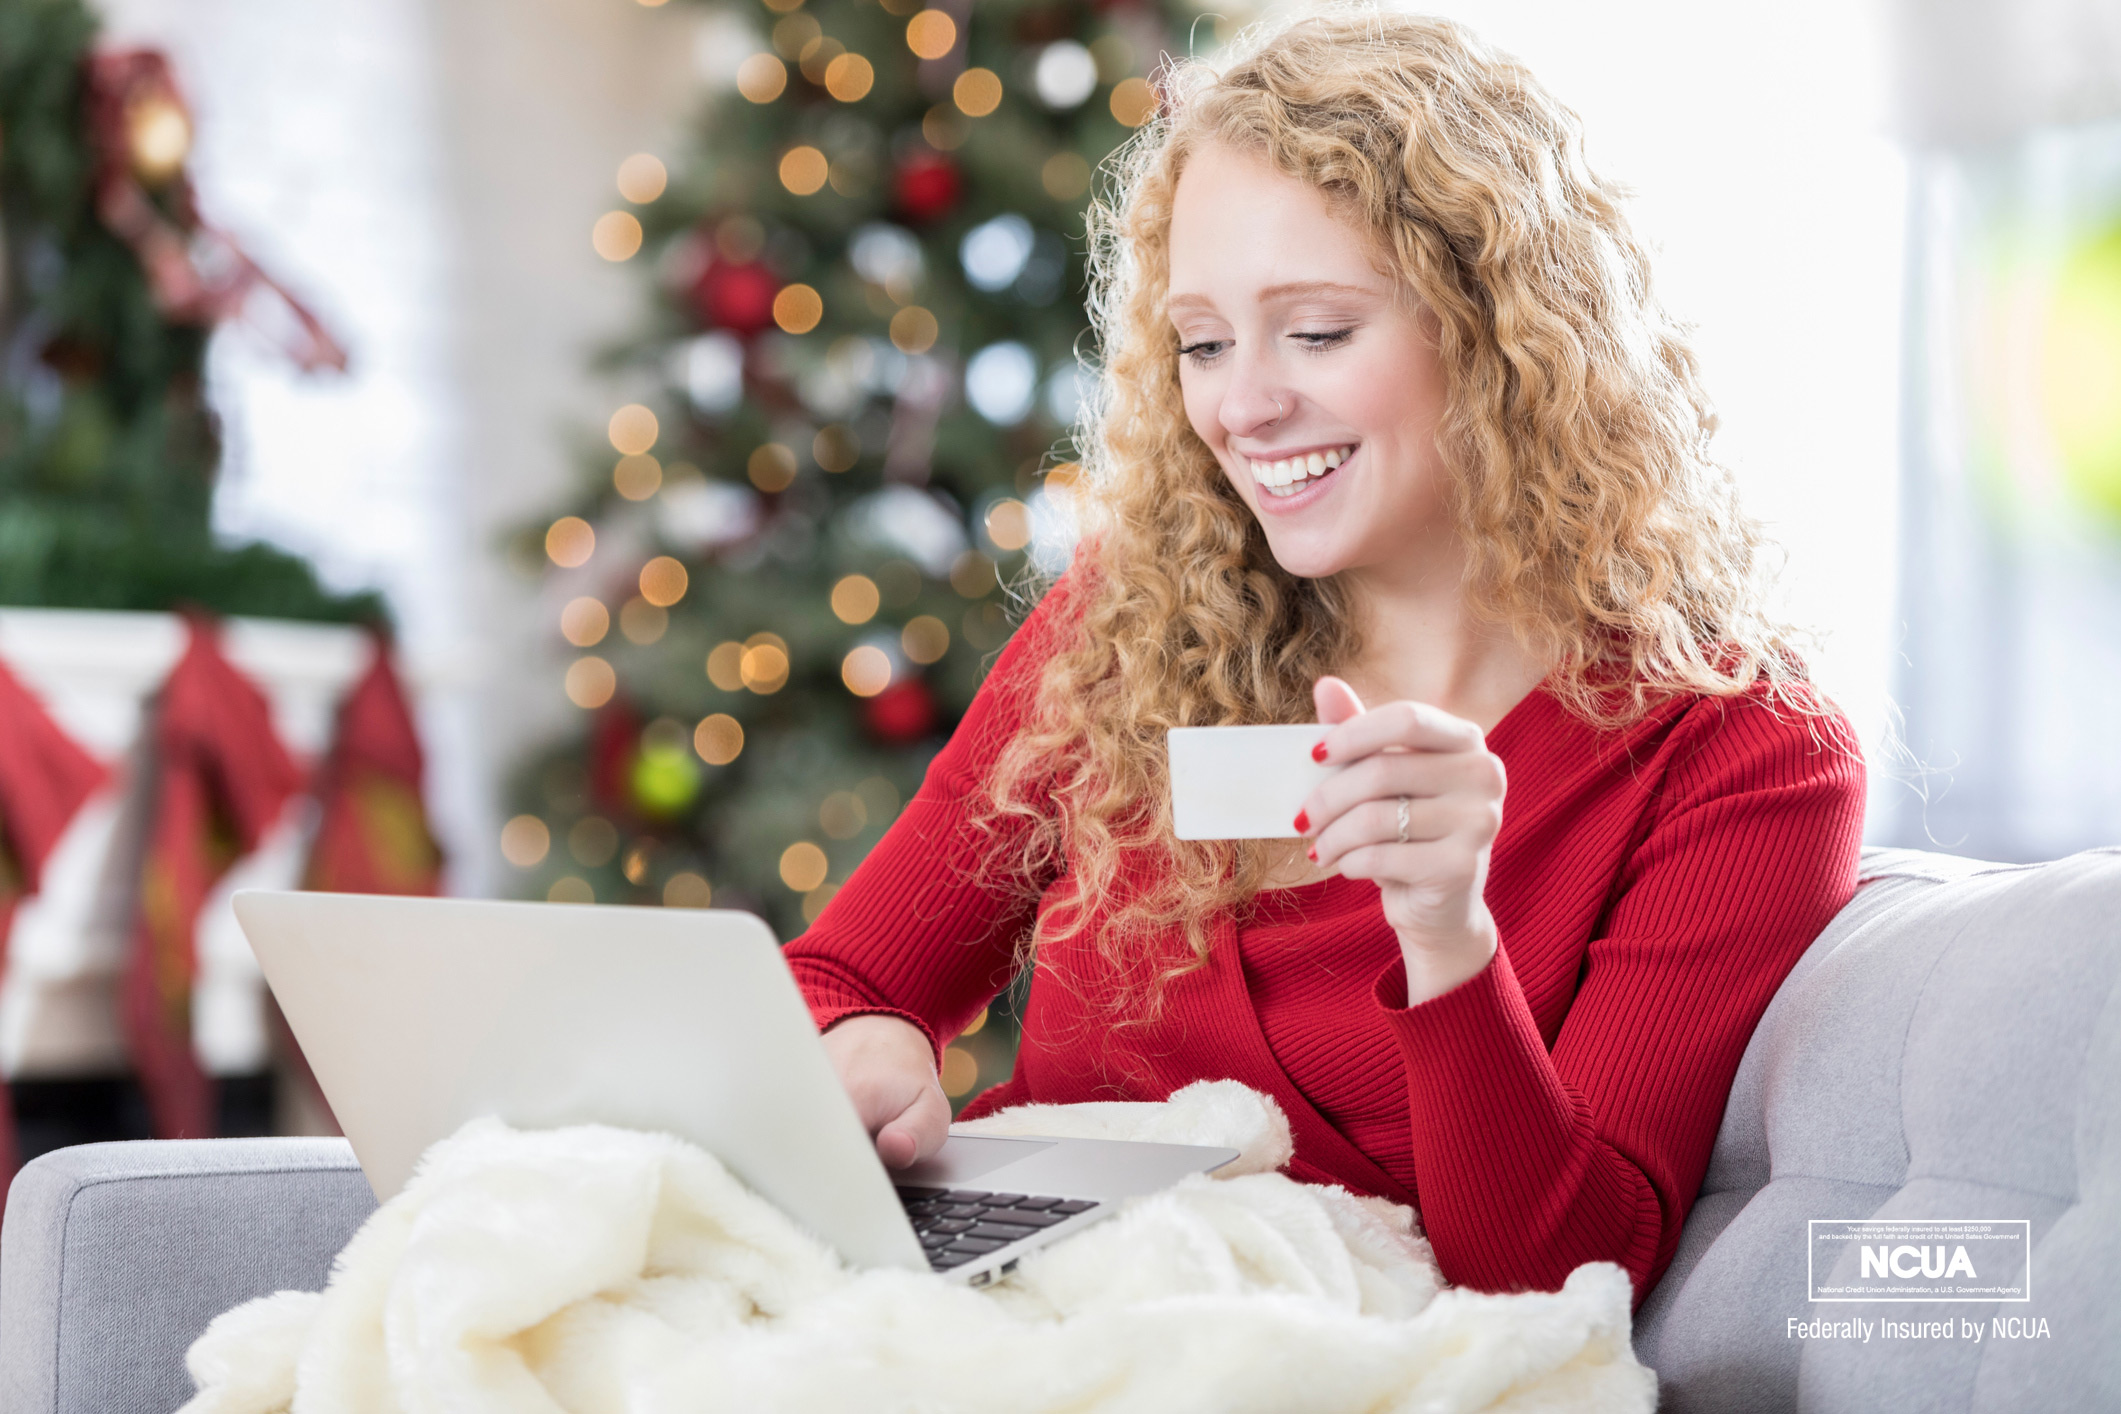 Georgia Heritage FCU is offering a skip-a-payment option for the holidays. To learn more about our personal loan, home loan, and auto loan programs, visit one of our credit union branches in the Savannah Metropolitan Area.